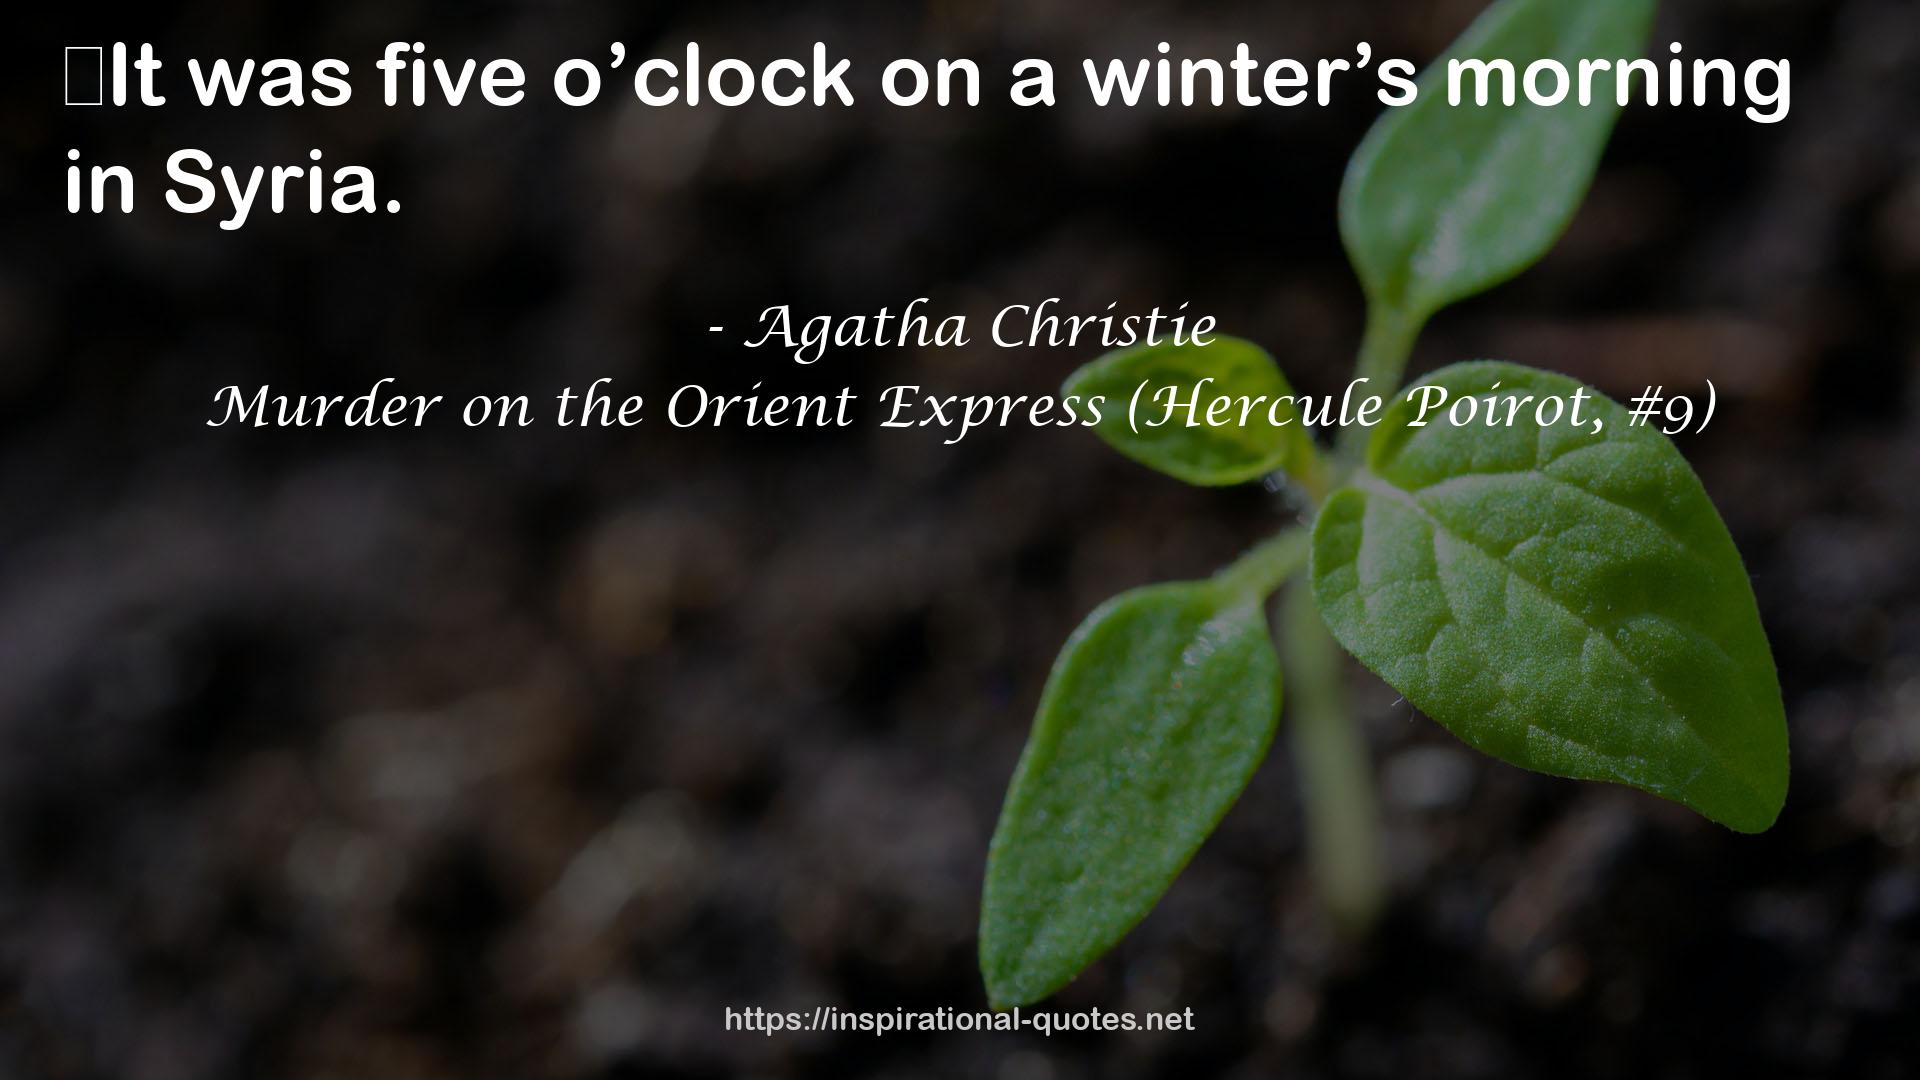 Murder on the Orient Express (Hercule Poirot, #9) QUOTES